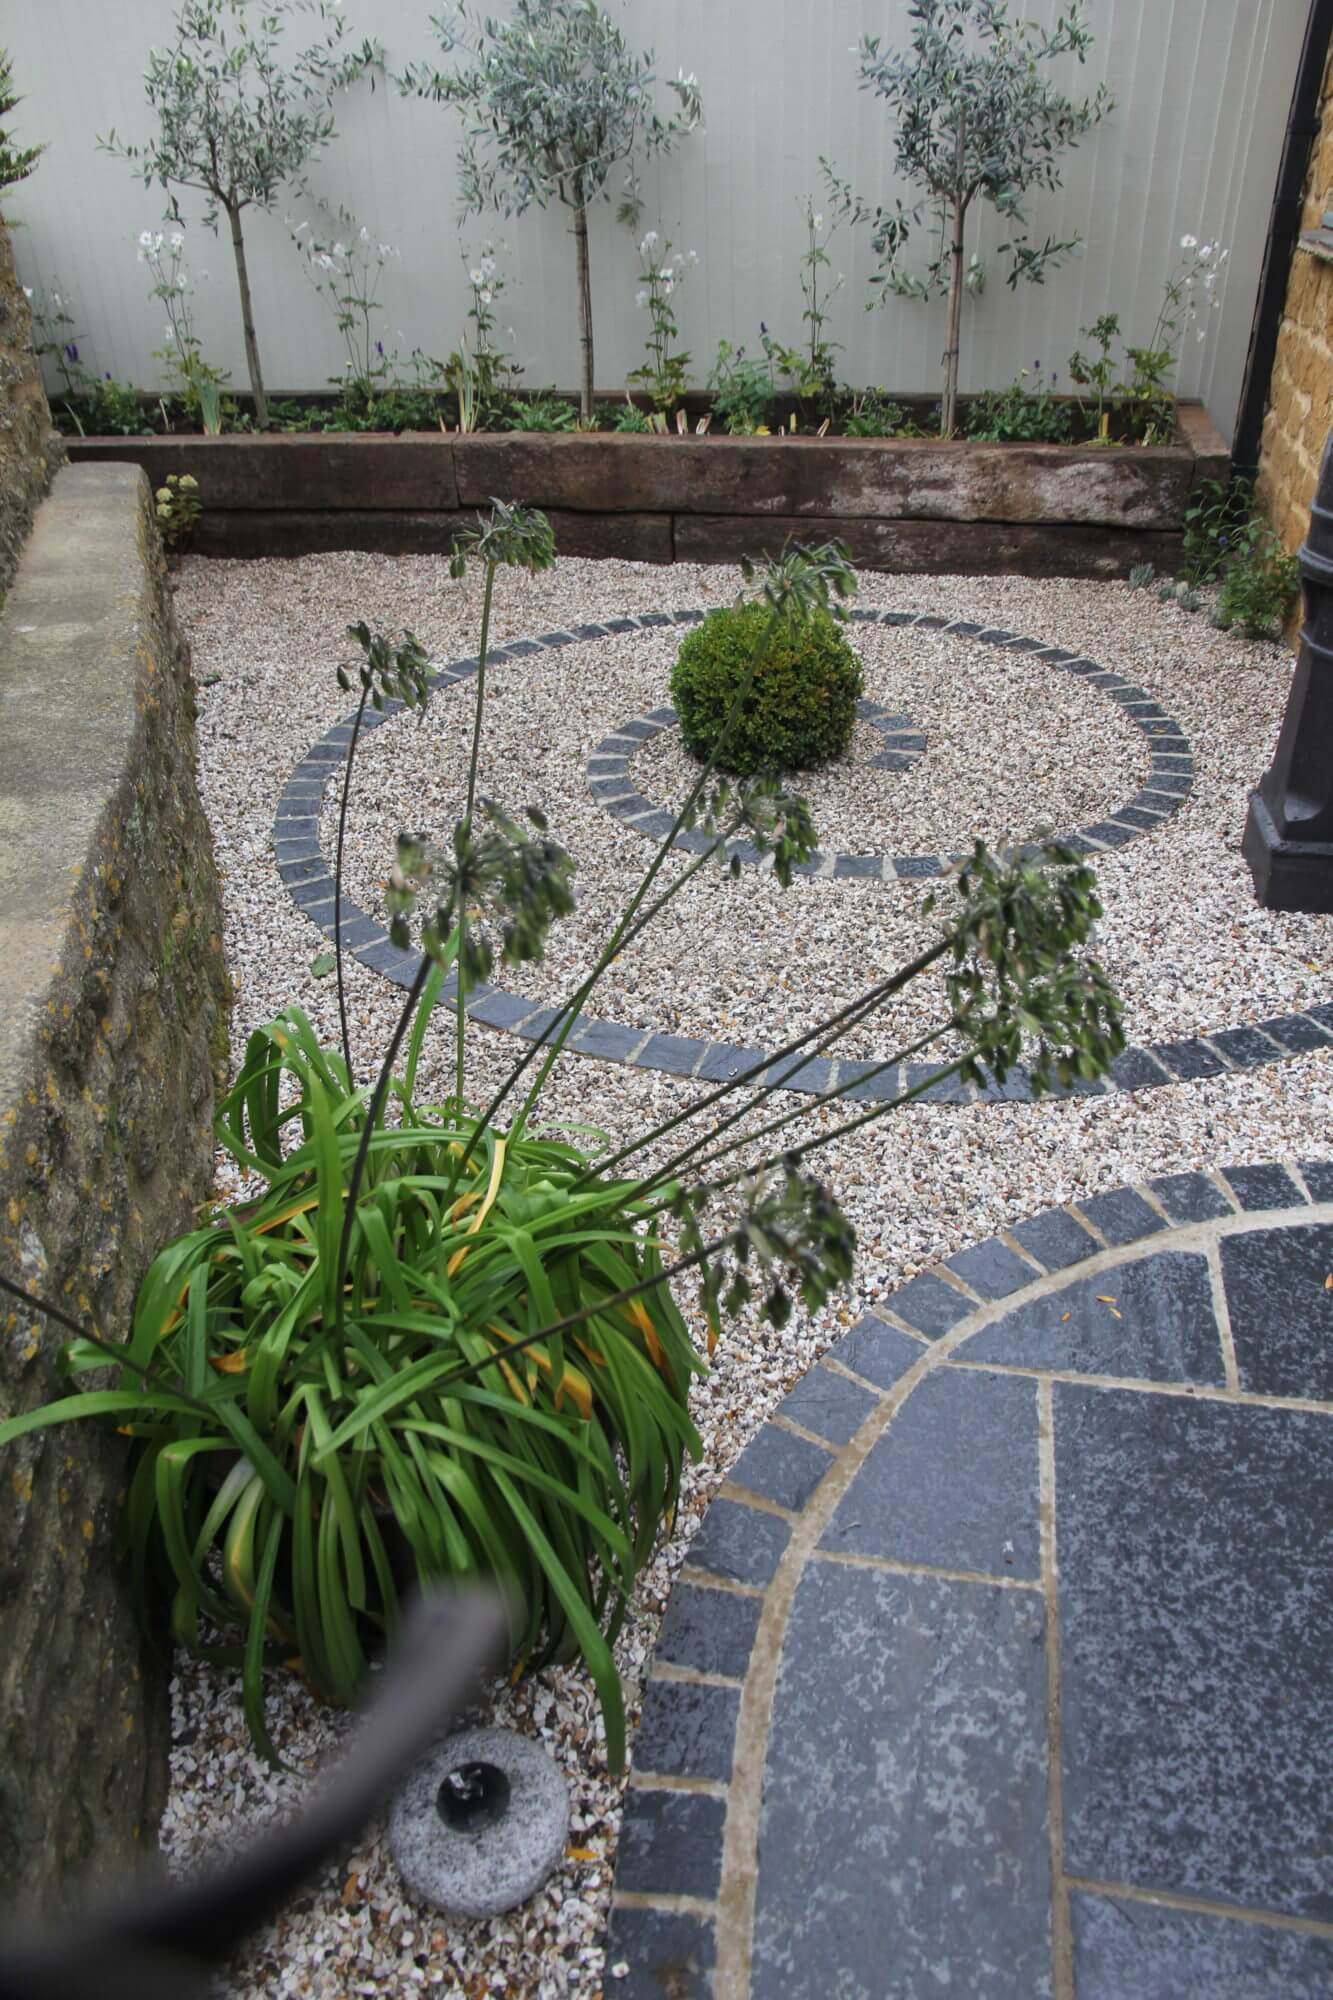 Snail pattern made from paving slabs in small garden